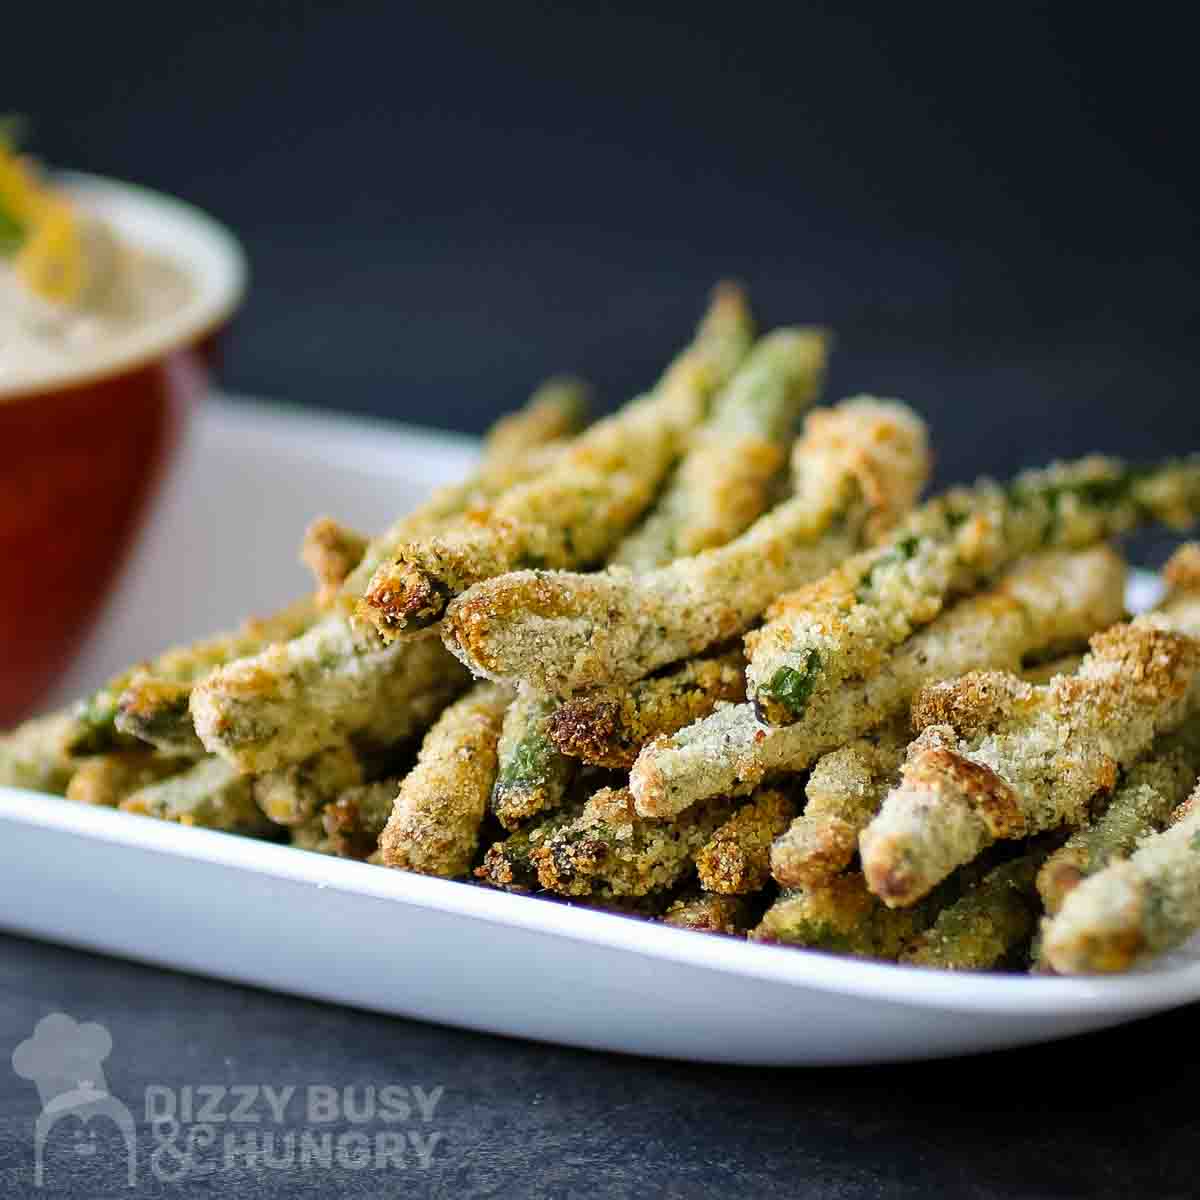 Side view of crispy baked green bean fries stacked on a white plate with a red bowl on the side and a black background.